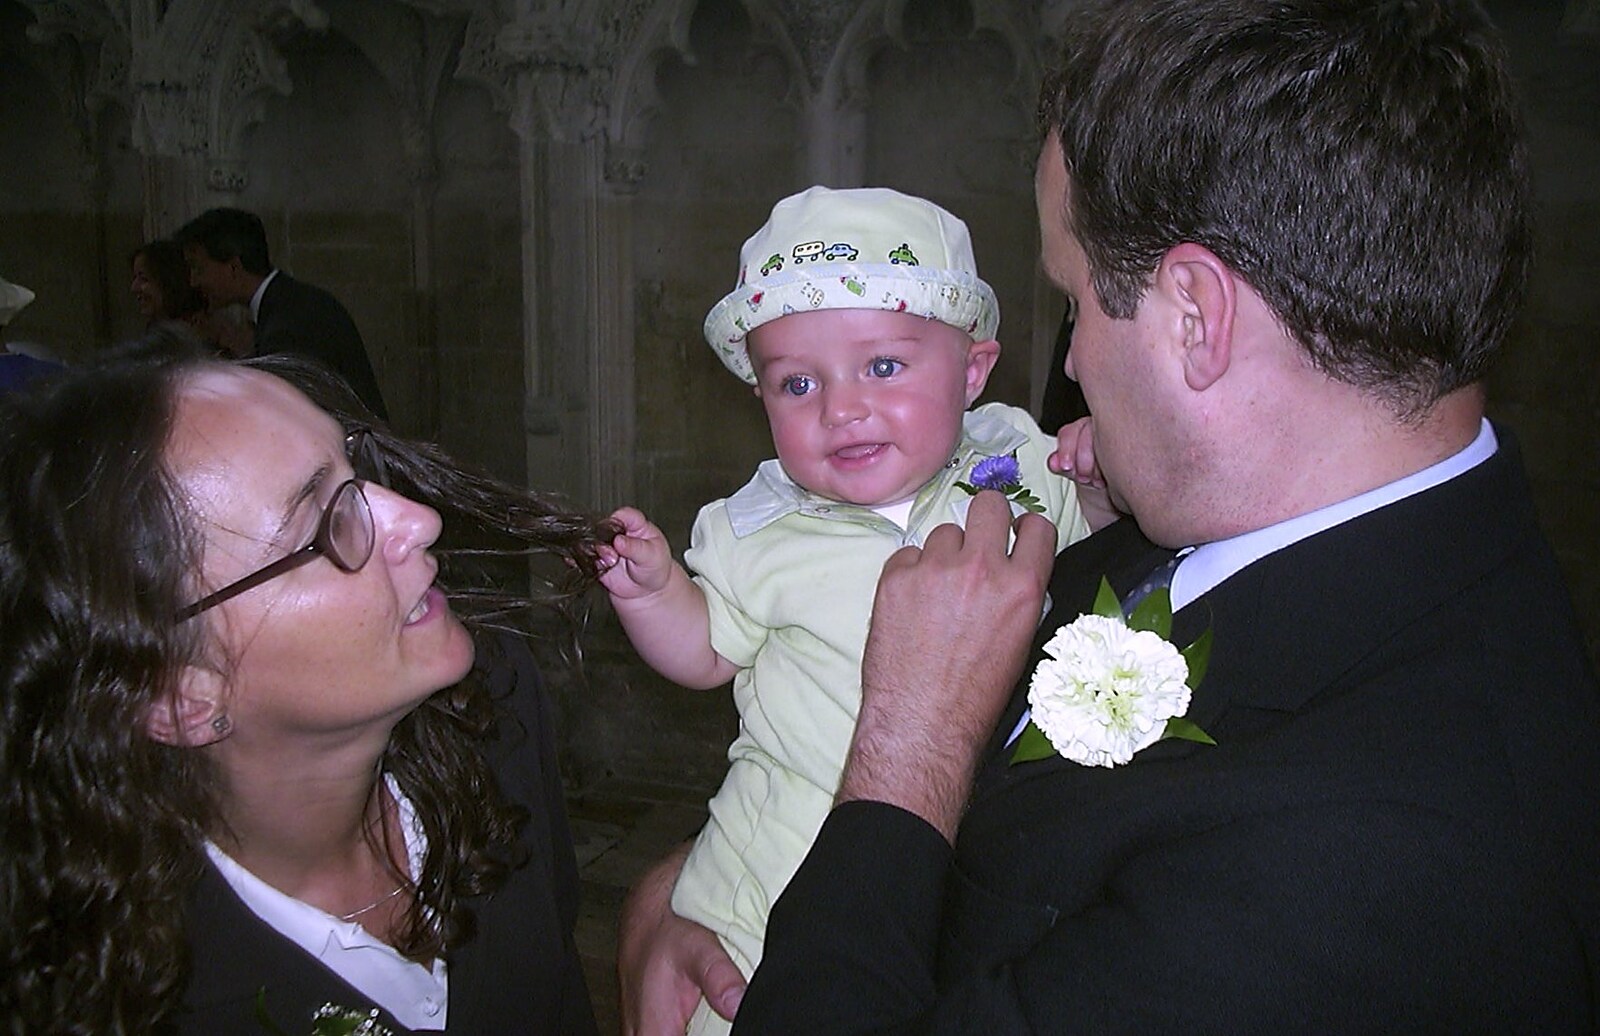 Stef and Kath's 3G Lab Wedding, Ely, Cambridgeshire - 28th July 2001: Cora, Dan and their baby